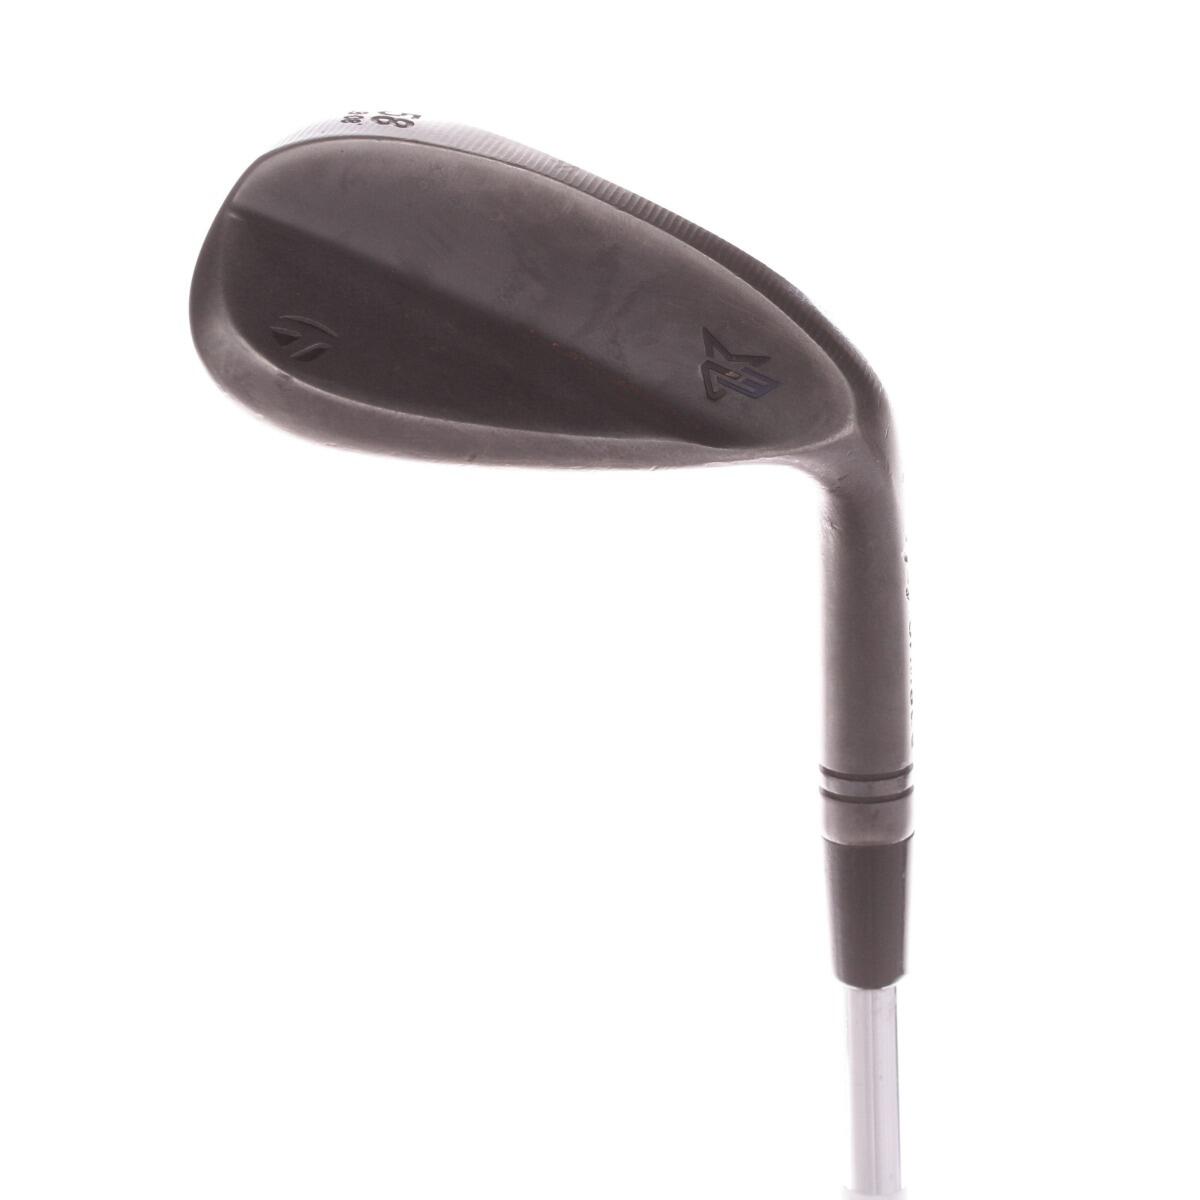 TAYLORMADE USED - Wedge TaylorMade Milled Grind 3 Black LB 58* Steel Right Handed - GRADE B